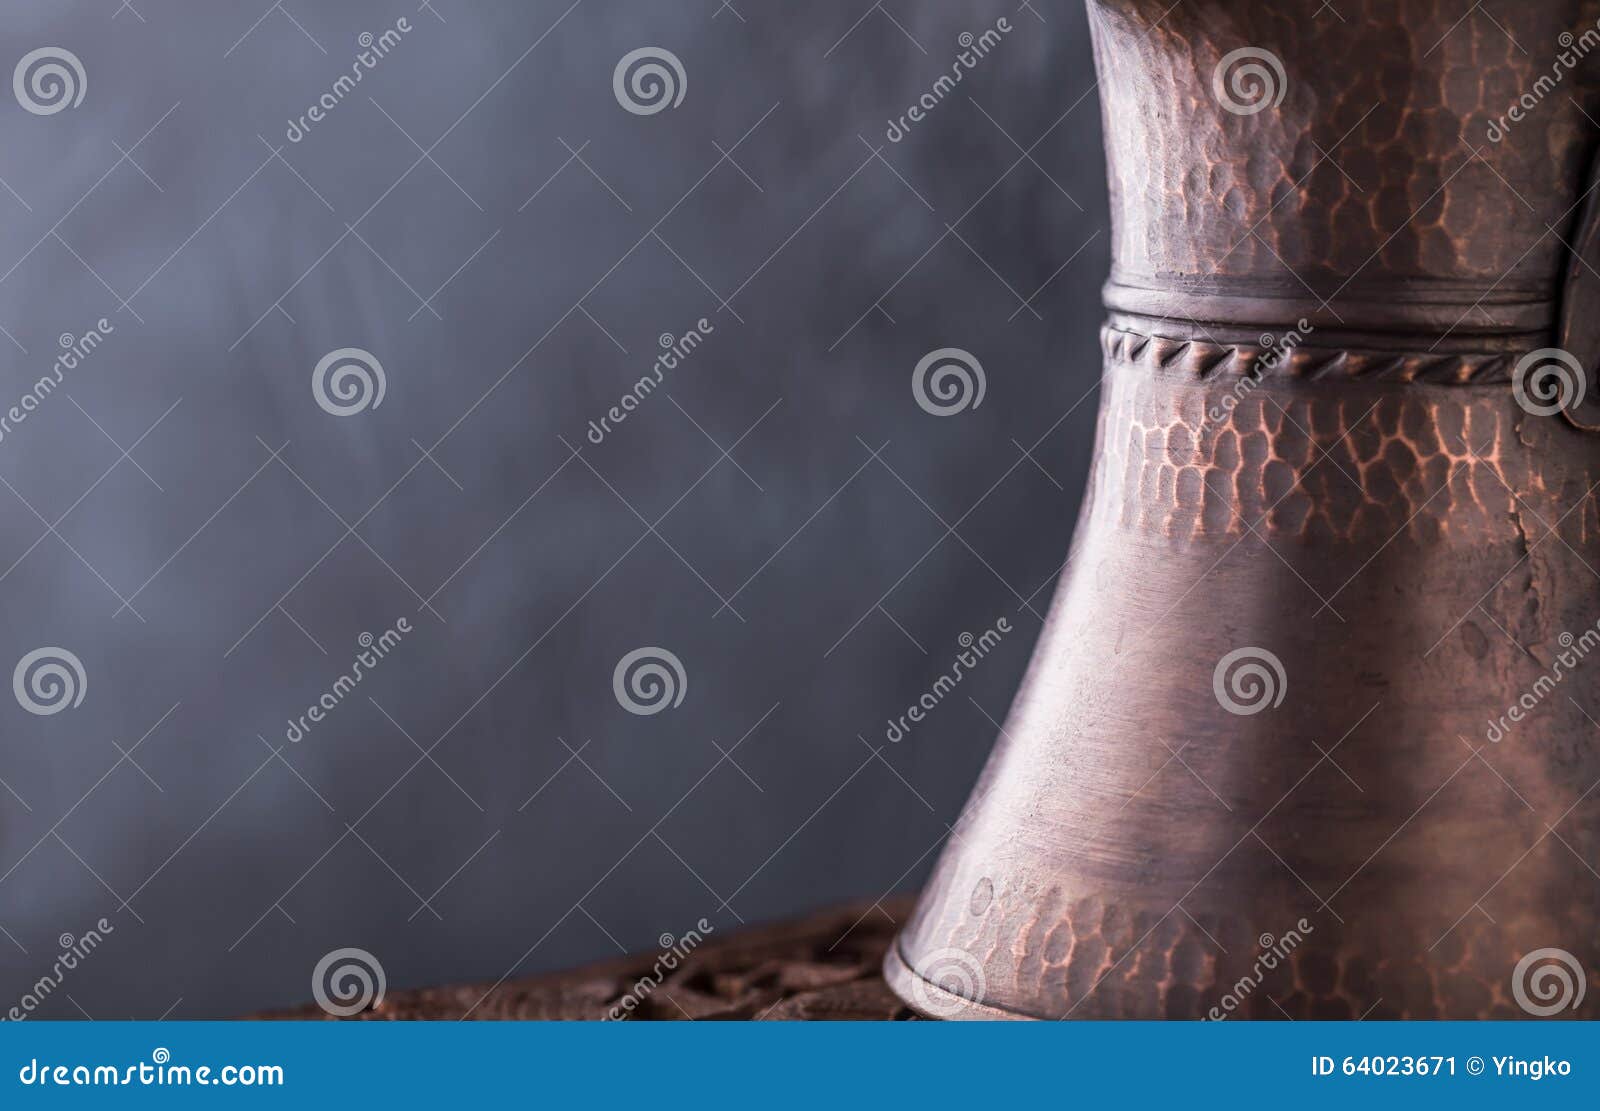 turkish coffee brewing pot from right